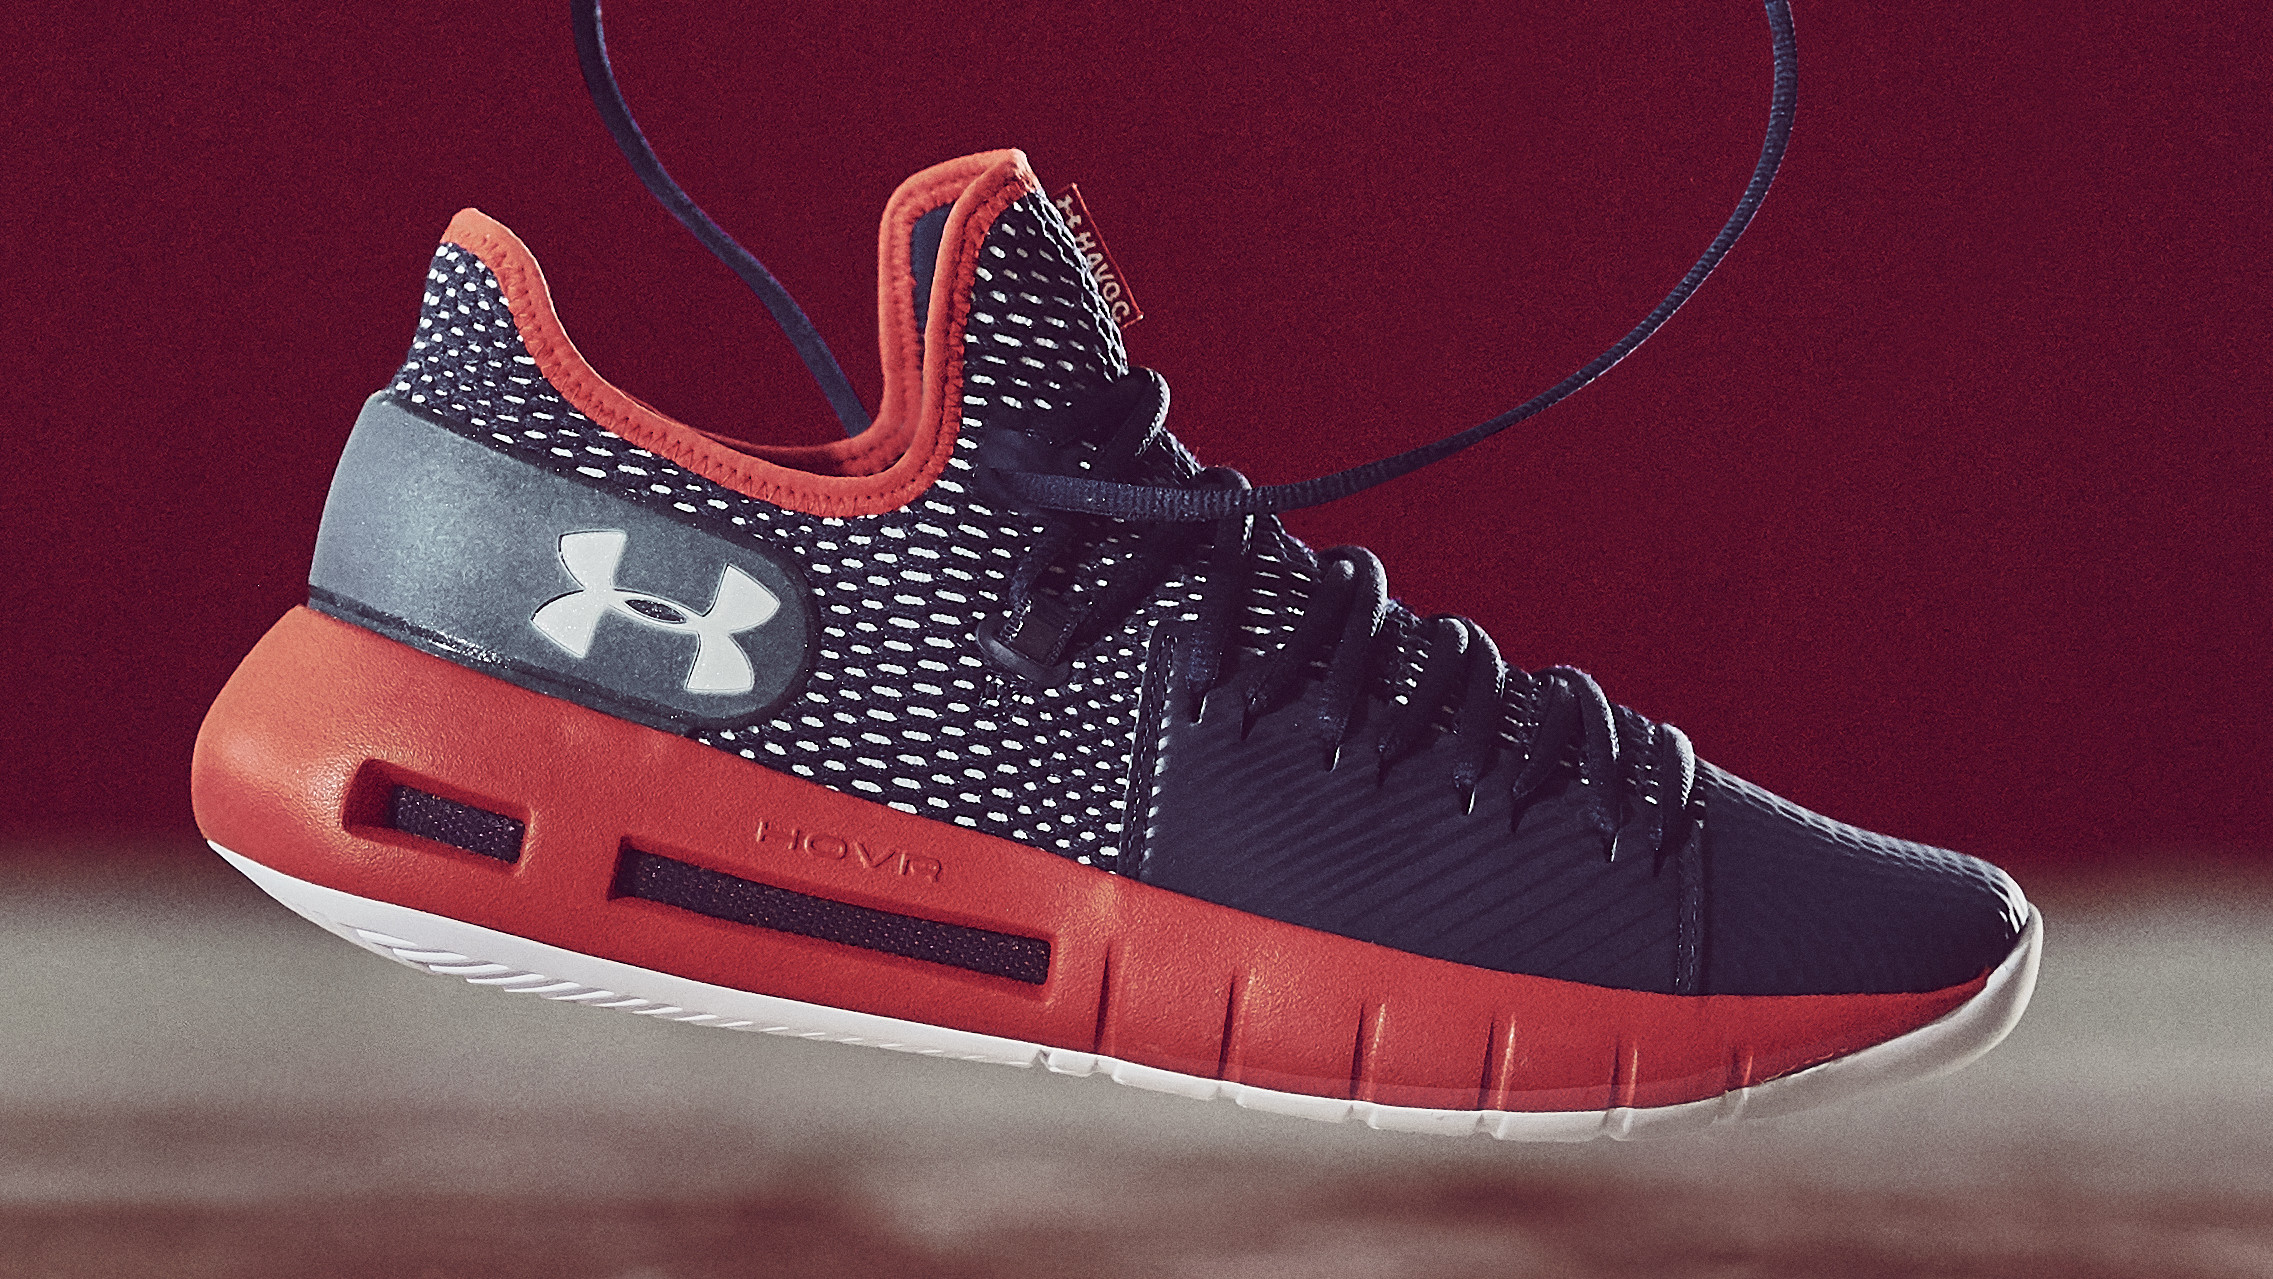 Under Armour Hovr Cushioning to Basketball |